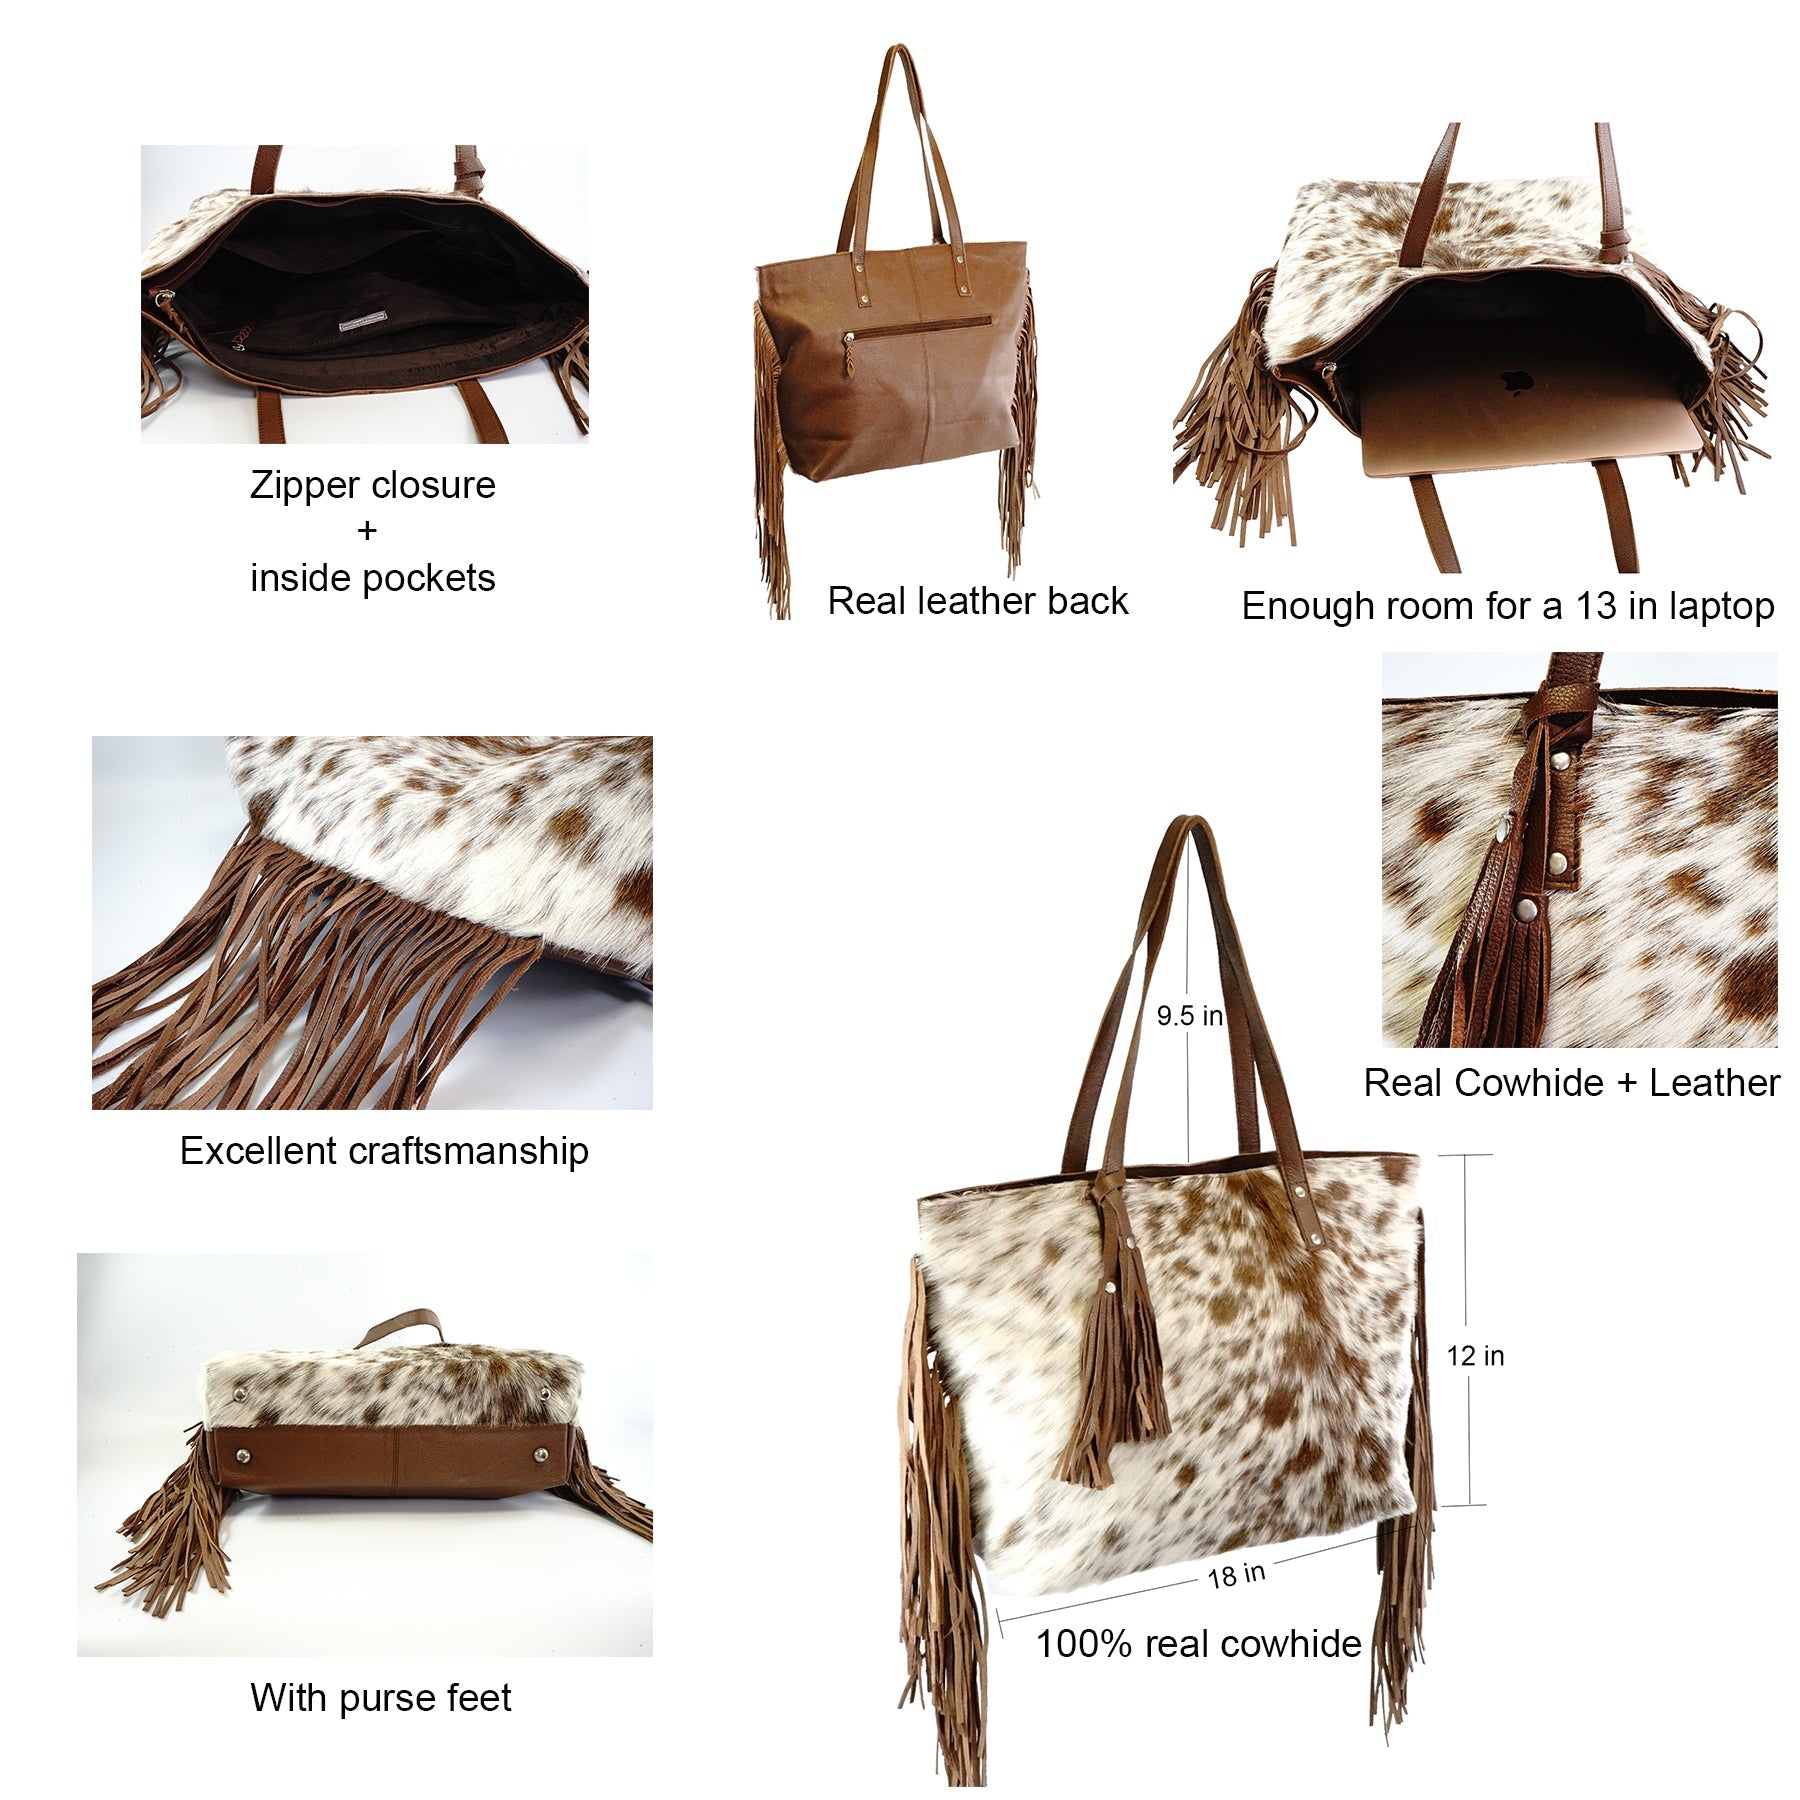 Genuine leather hair on cowhide women's shoulder bag with fringes - Rodeo Cowhide RugsChocolate